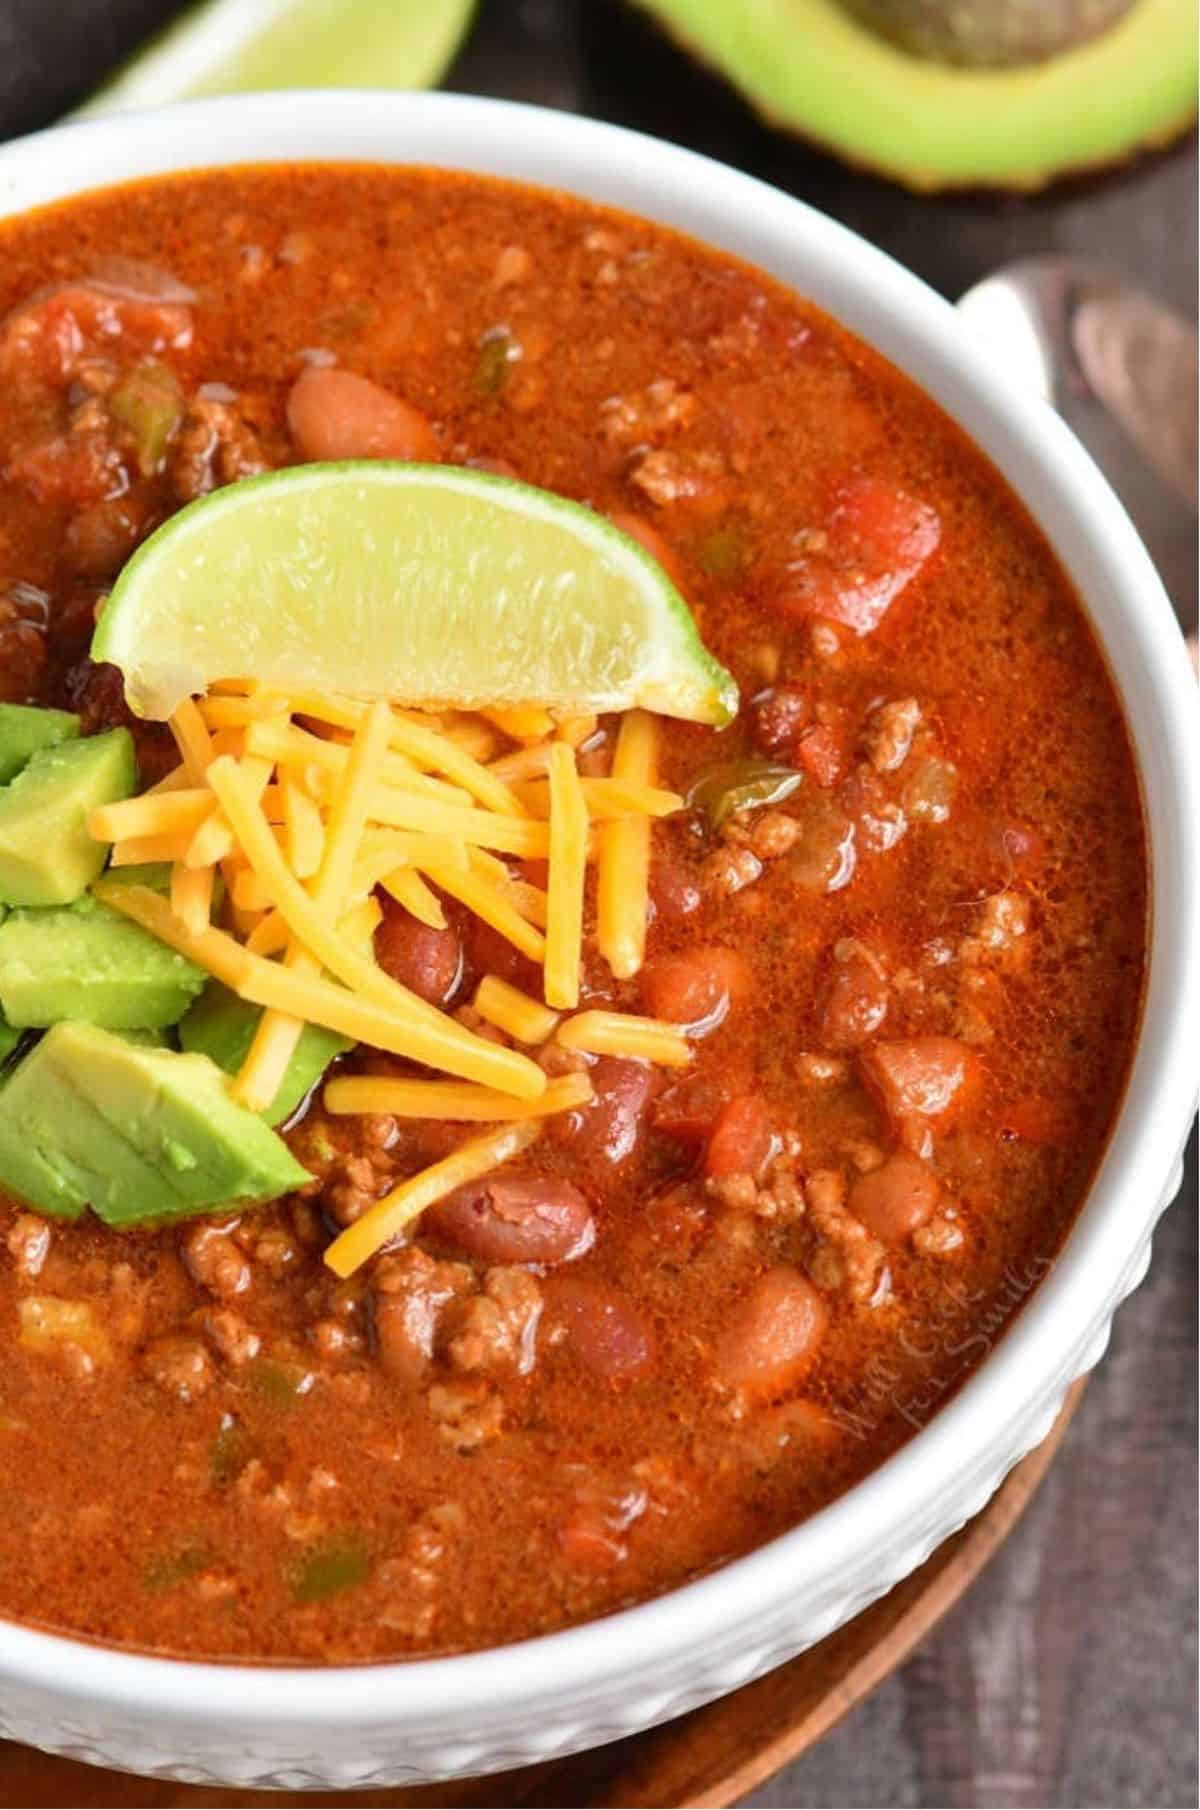 Chili in a bowl with shredded cheese, diced avocado, and a lime wedge on top as garnish.